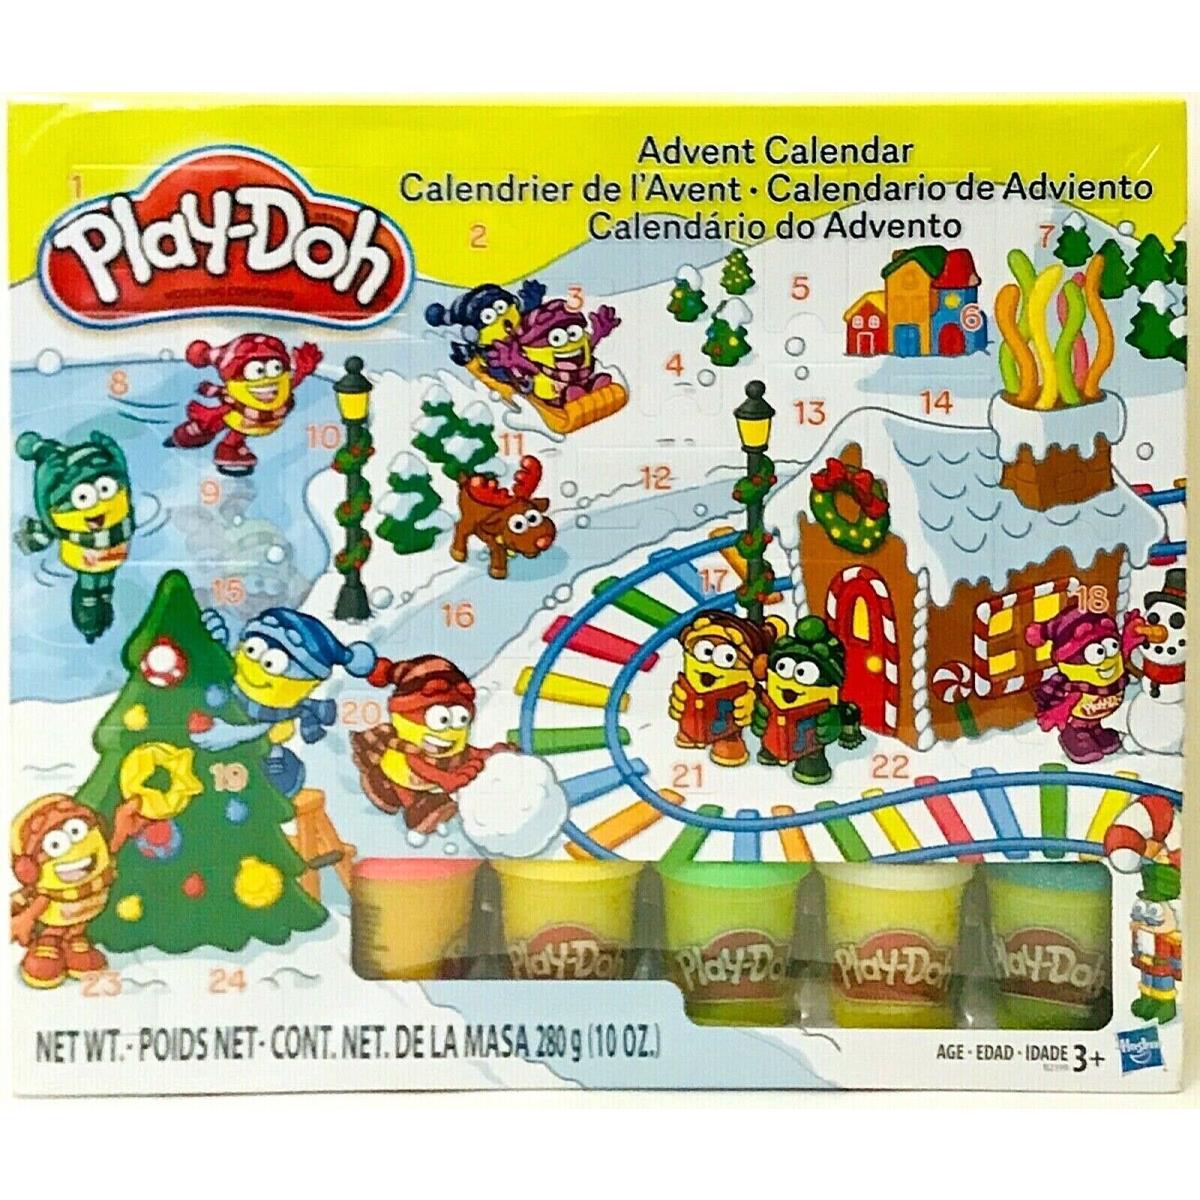 Hasbro Play-doh Advent Calendar with 24 Accessories 5 Cans Of Modeling Compound